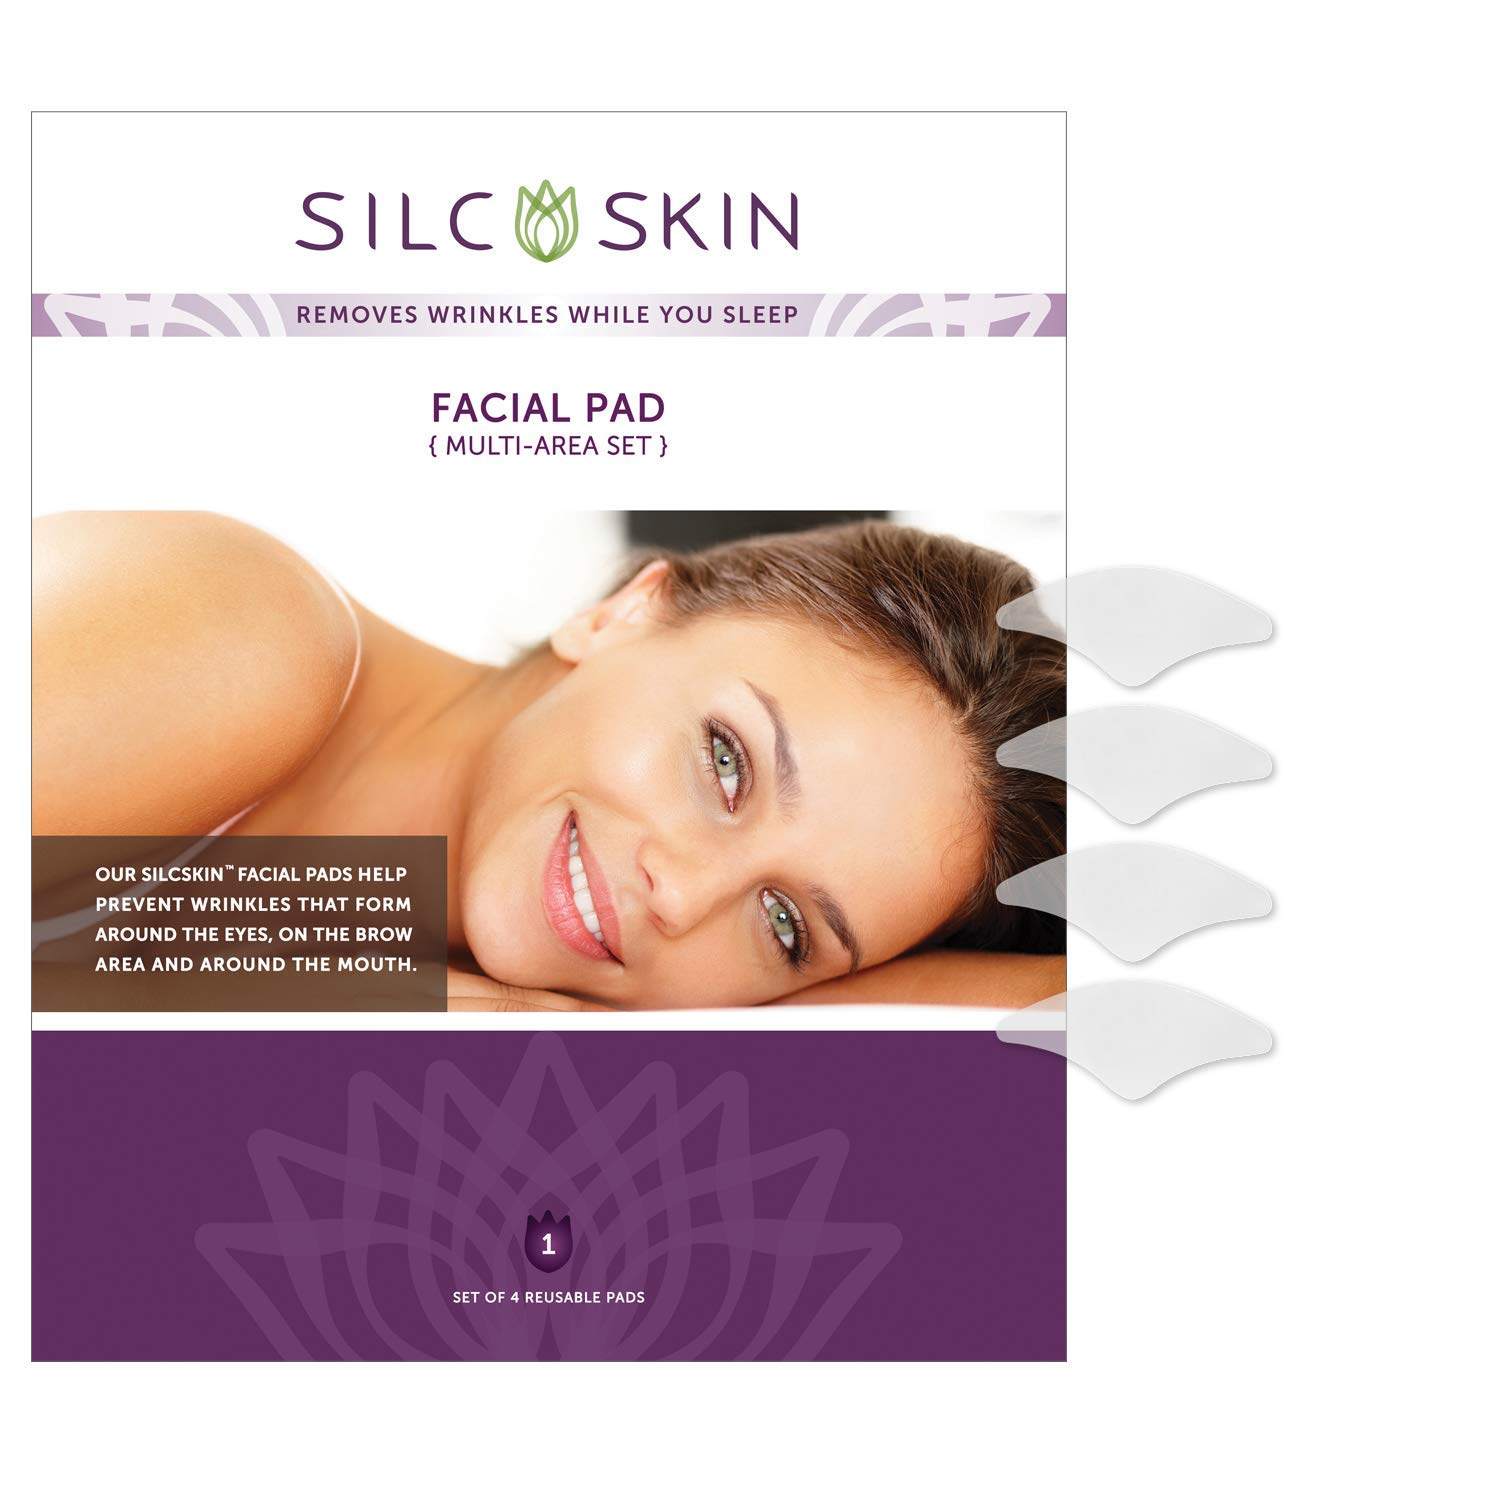 Silc Skin Facial Pad Multi-Area Set, Use for Wrinkles & Lines from Sun Aging Side Sleeping, Reusable Self Adhesive Medical Grade Silicone, 4 Individual Pads